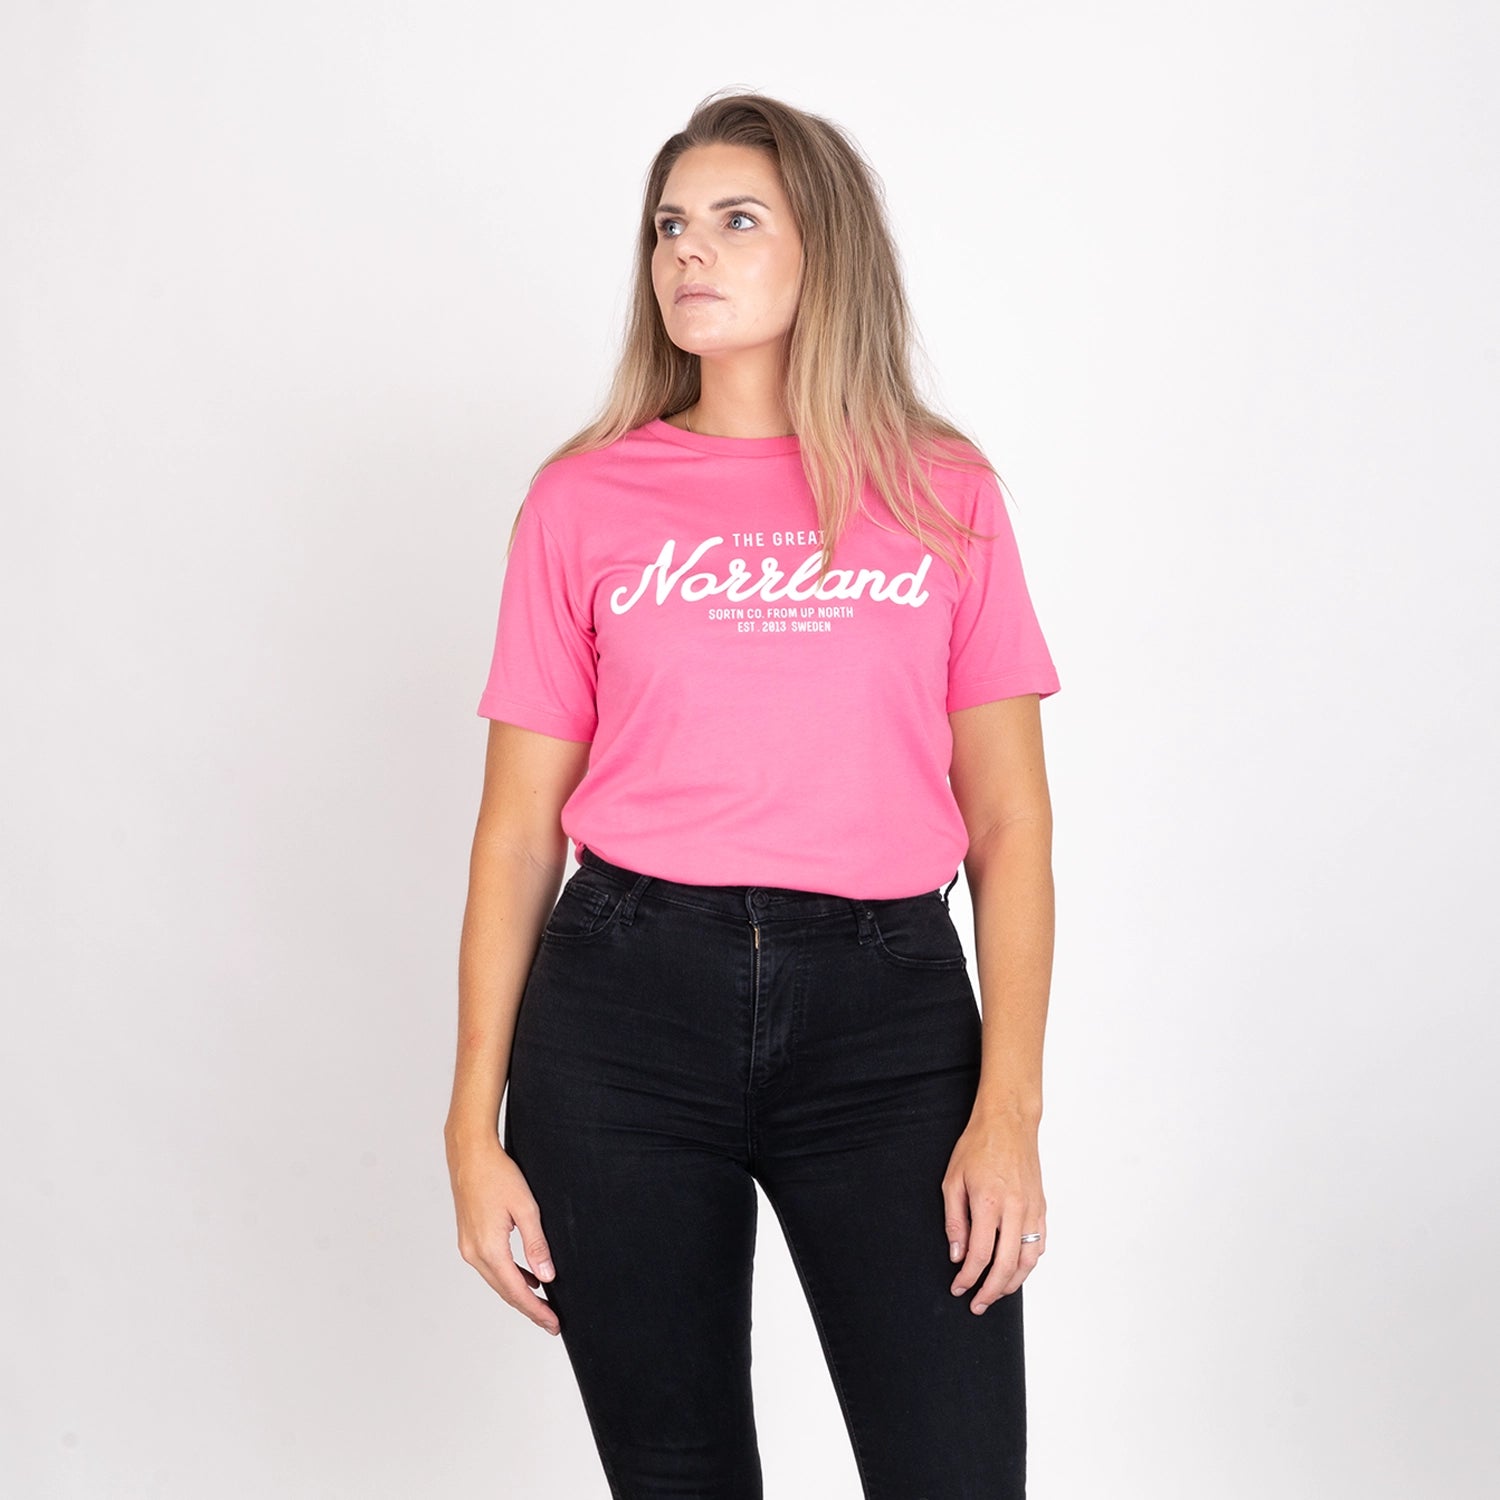 GREAT NORRLAND T-SHIRT - HOT PINK